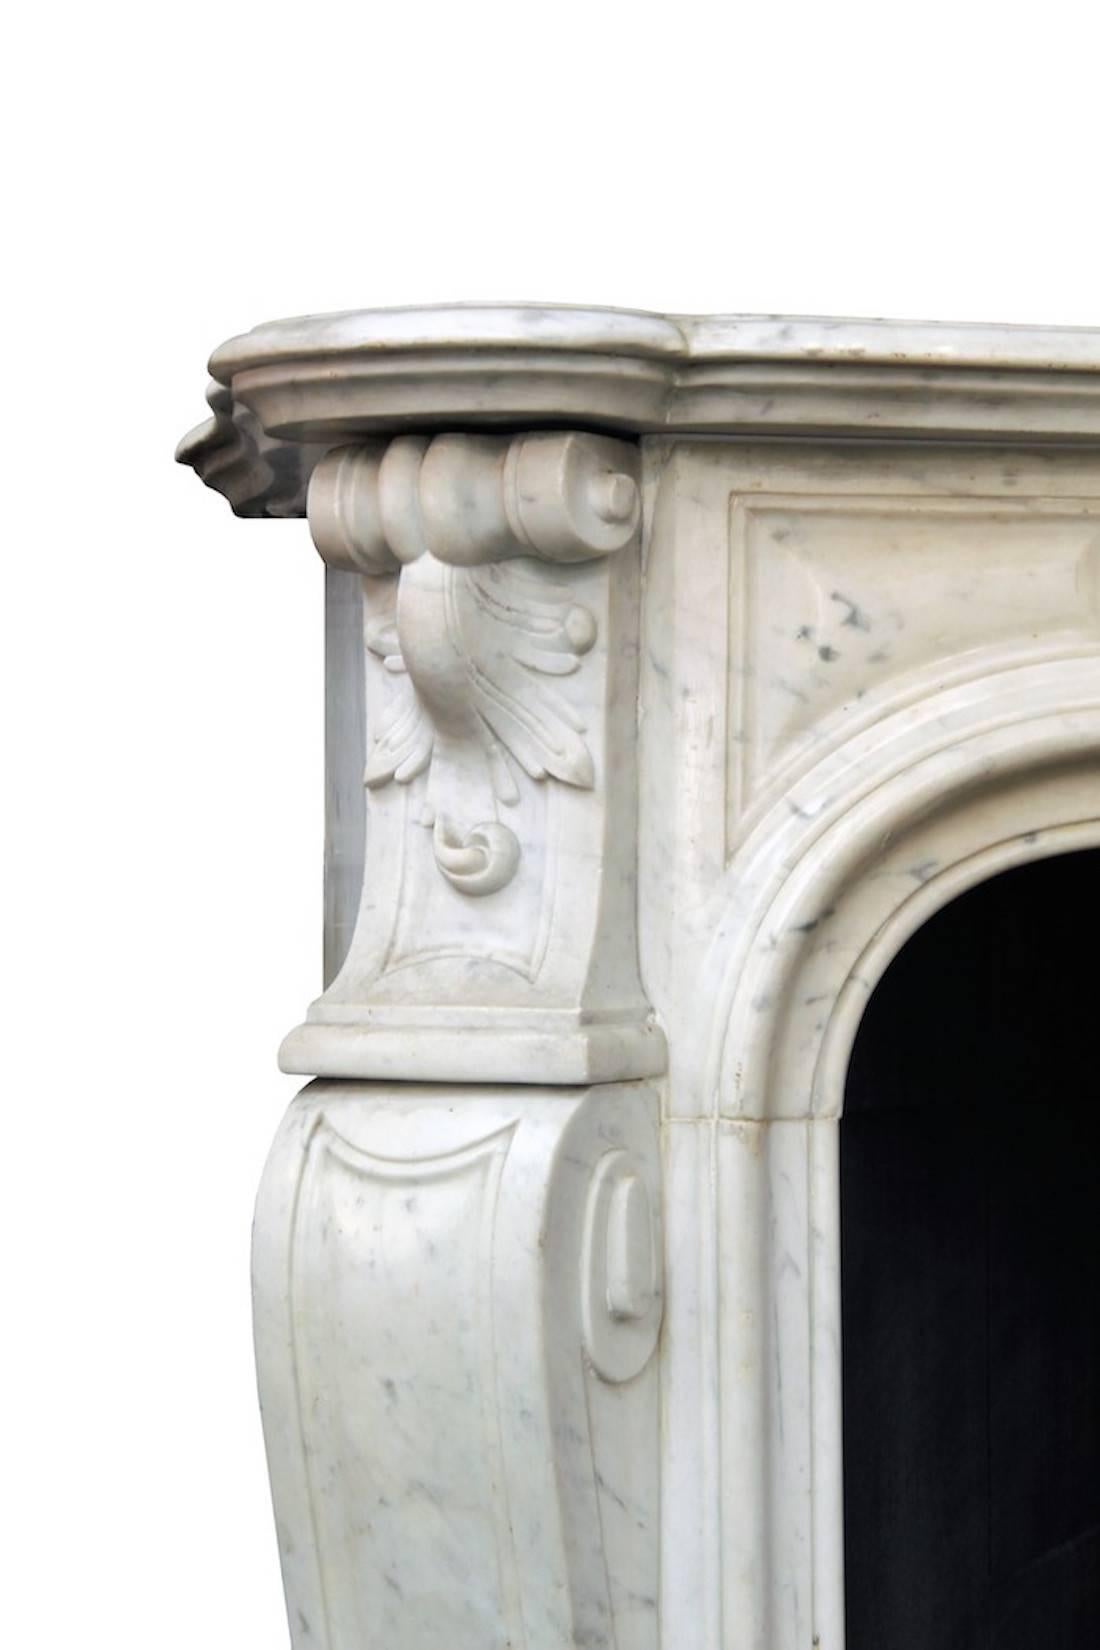 Large French Louis XV style mantle fireplace in white Carrara marble, 19th century﻿.
Refined and sinuous shapes and overall very minimalist, this elegant antique Louis XV style fireplace was made of Carrara marble during the 19th